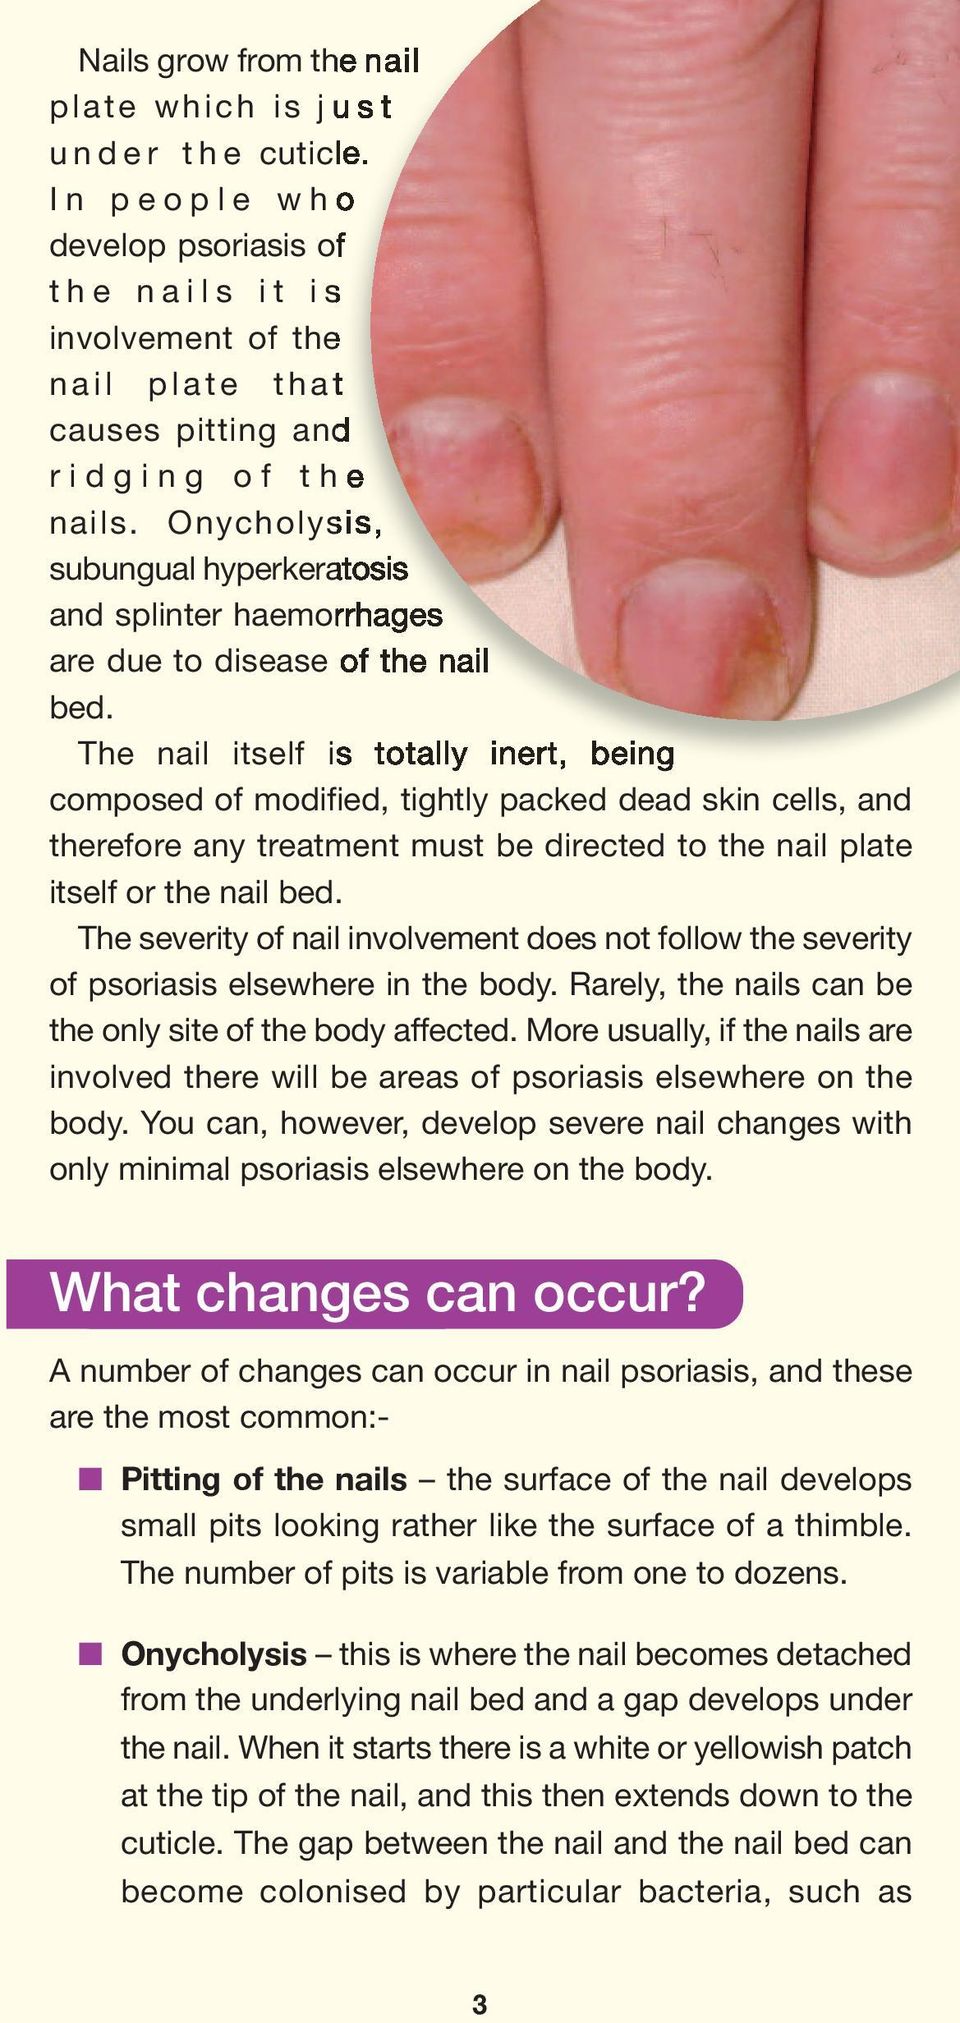 Onycholysis, subungual hyperkeratosis and splinter haemorrhages are due to disease of the nail bed.